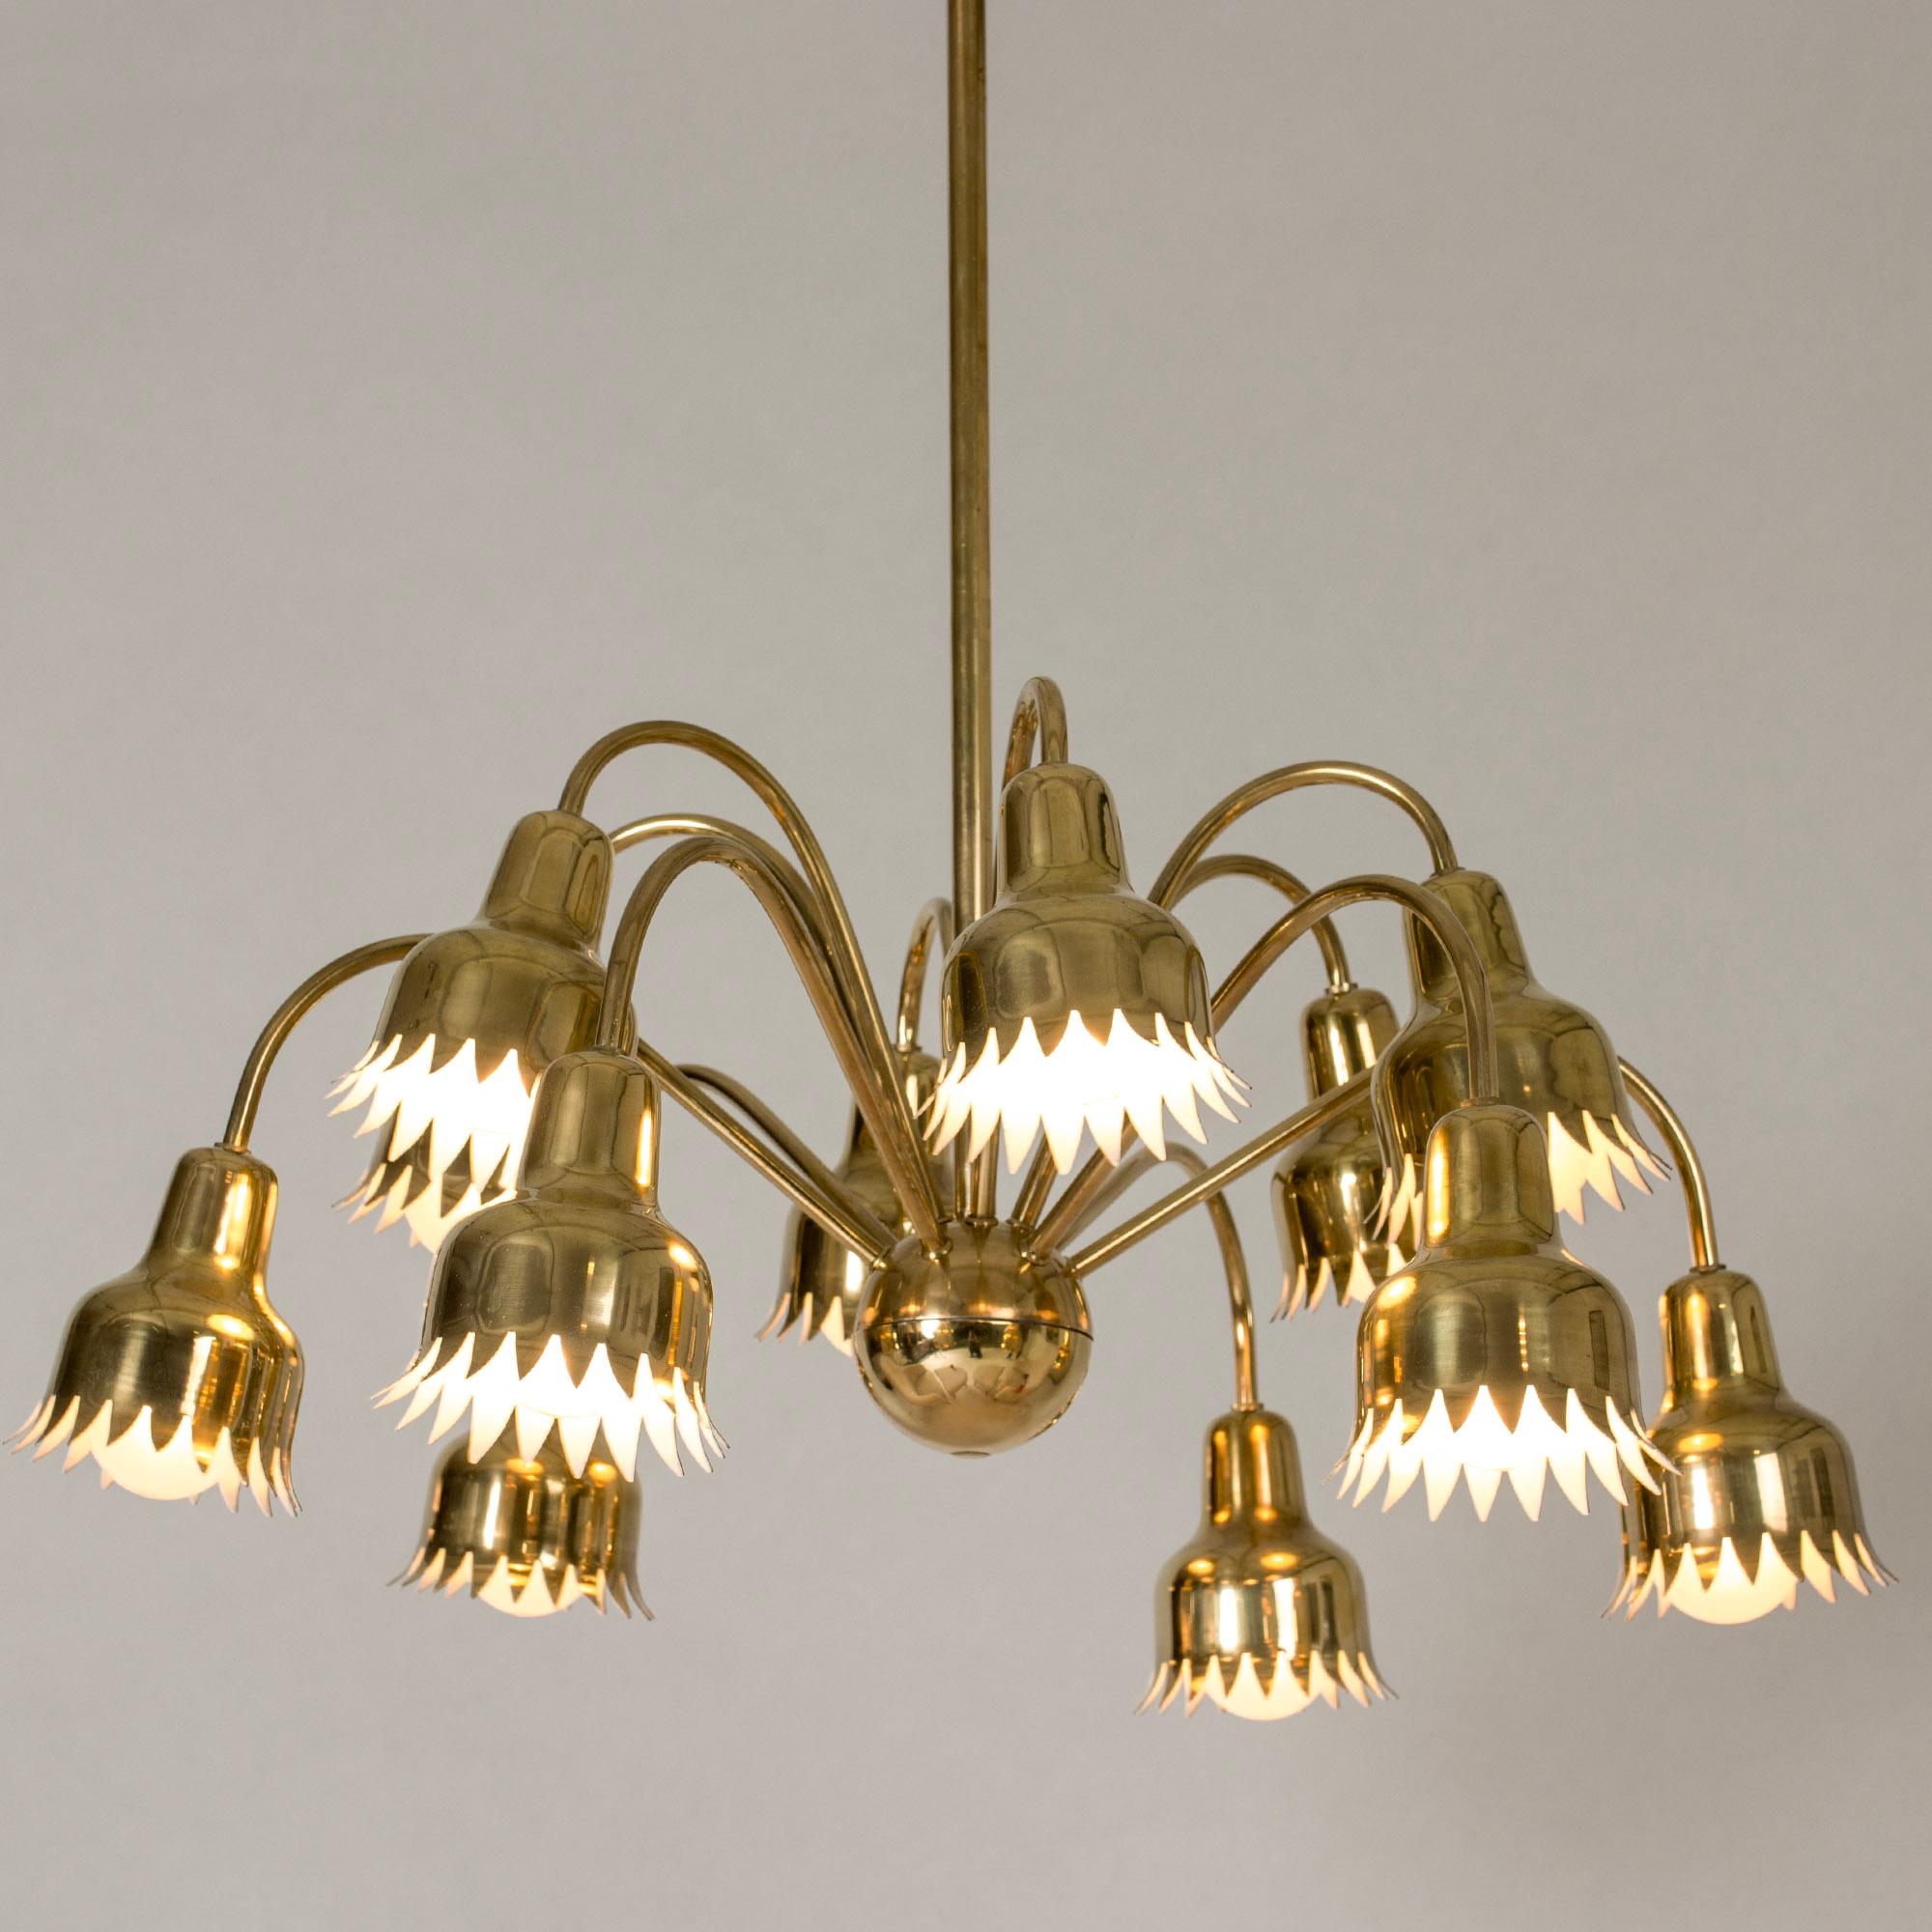 Stunning brass chandelier by Hans Bergström. Twelve curved arms extend from a central brass ball, with zigzag edged, flowerlike shades. A beautiful, embellished modernist piece.

Hans Bergström was the owner and creative director of the lighting